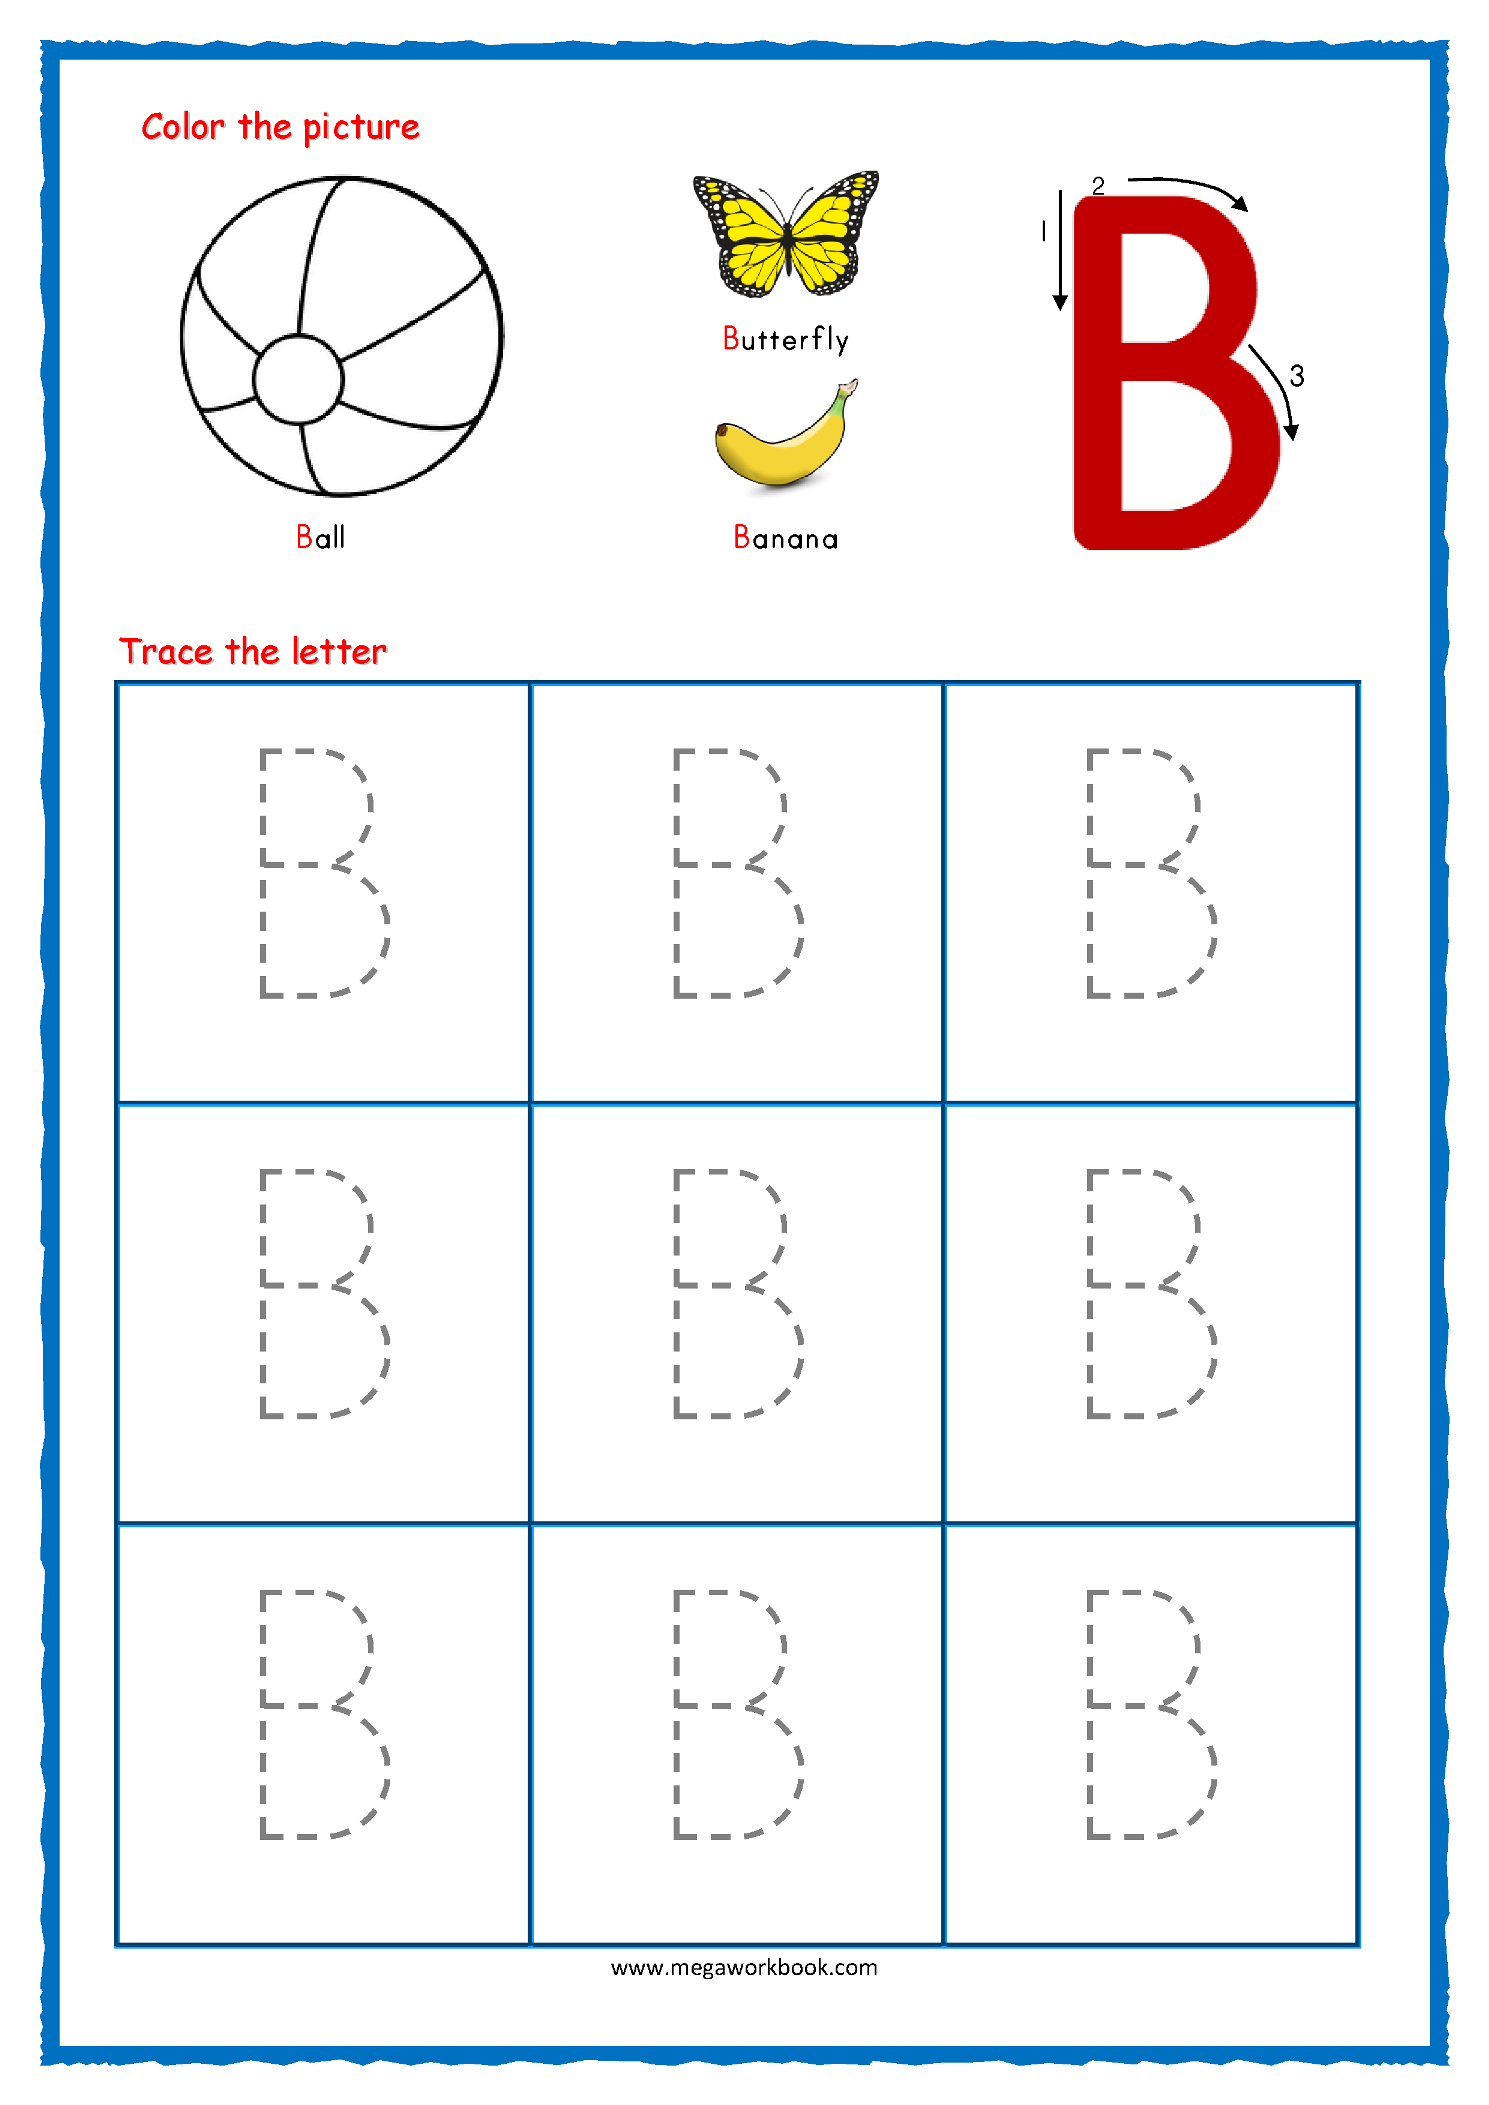 Coloring Book : Free Preschool Printables Coloring Book intended for Tracing The Letters Of The Alphabet Worksheets